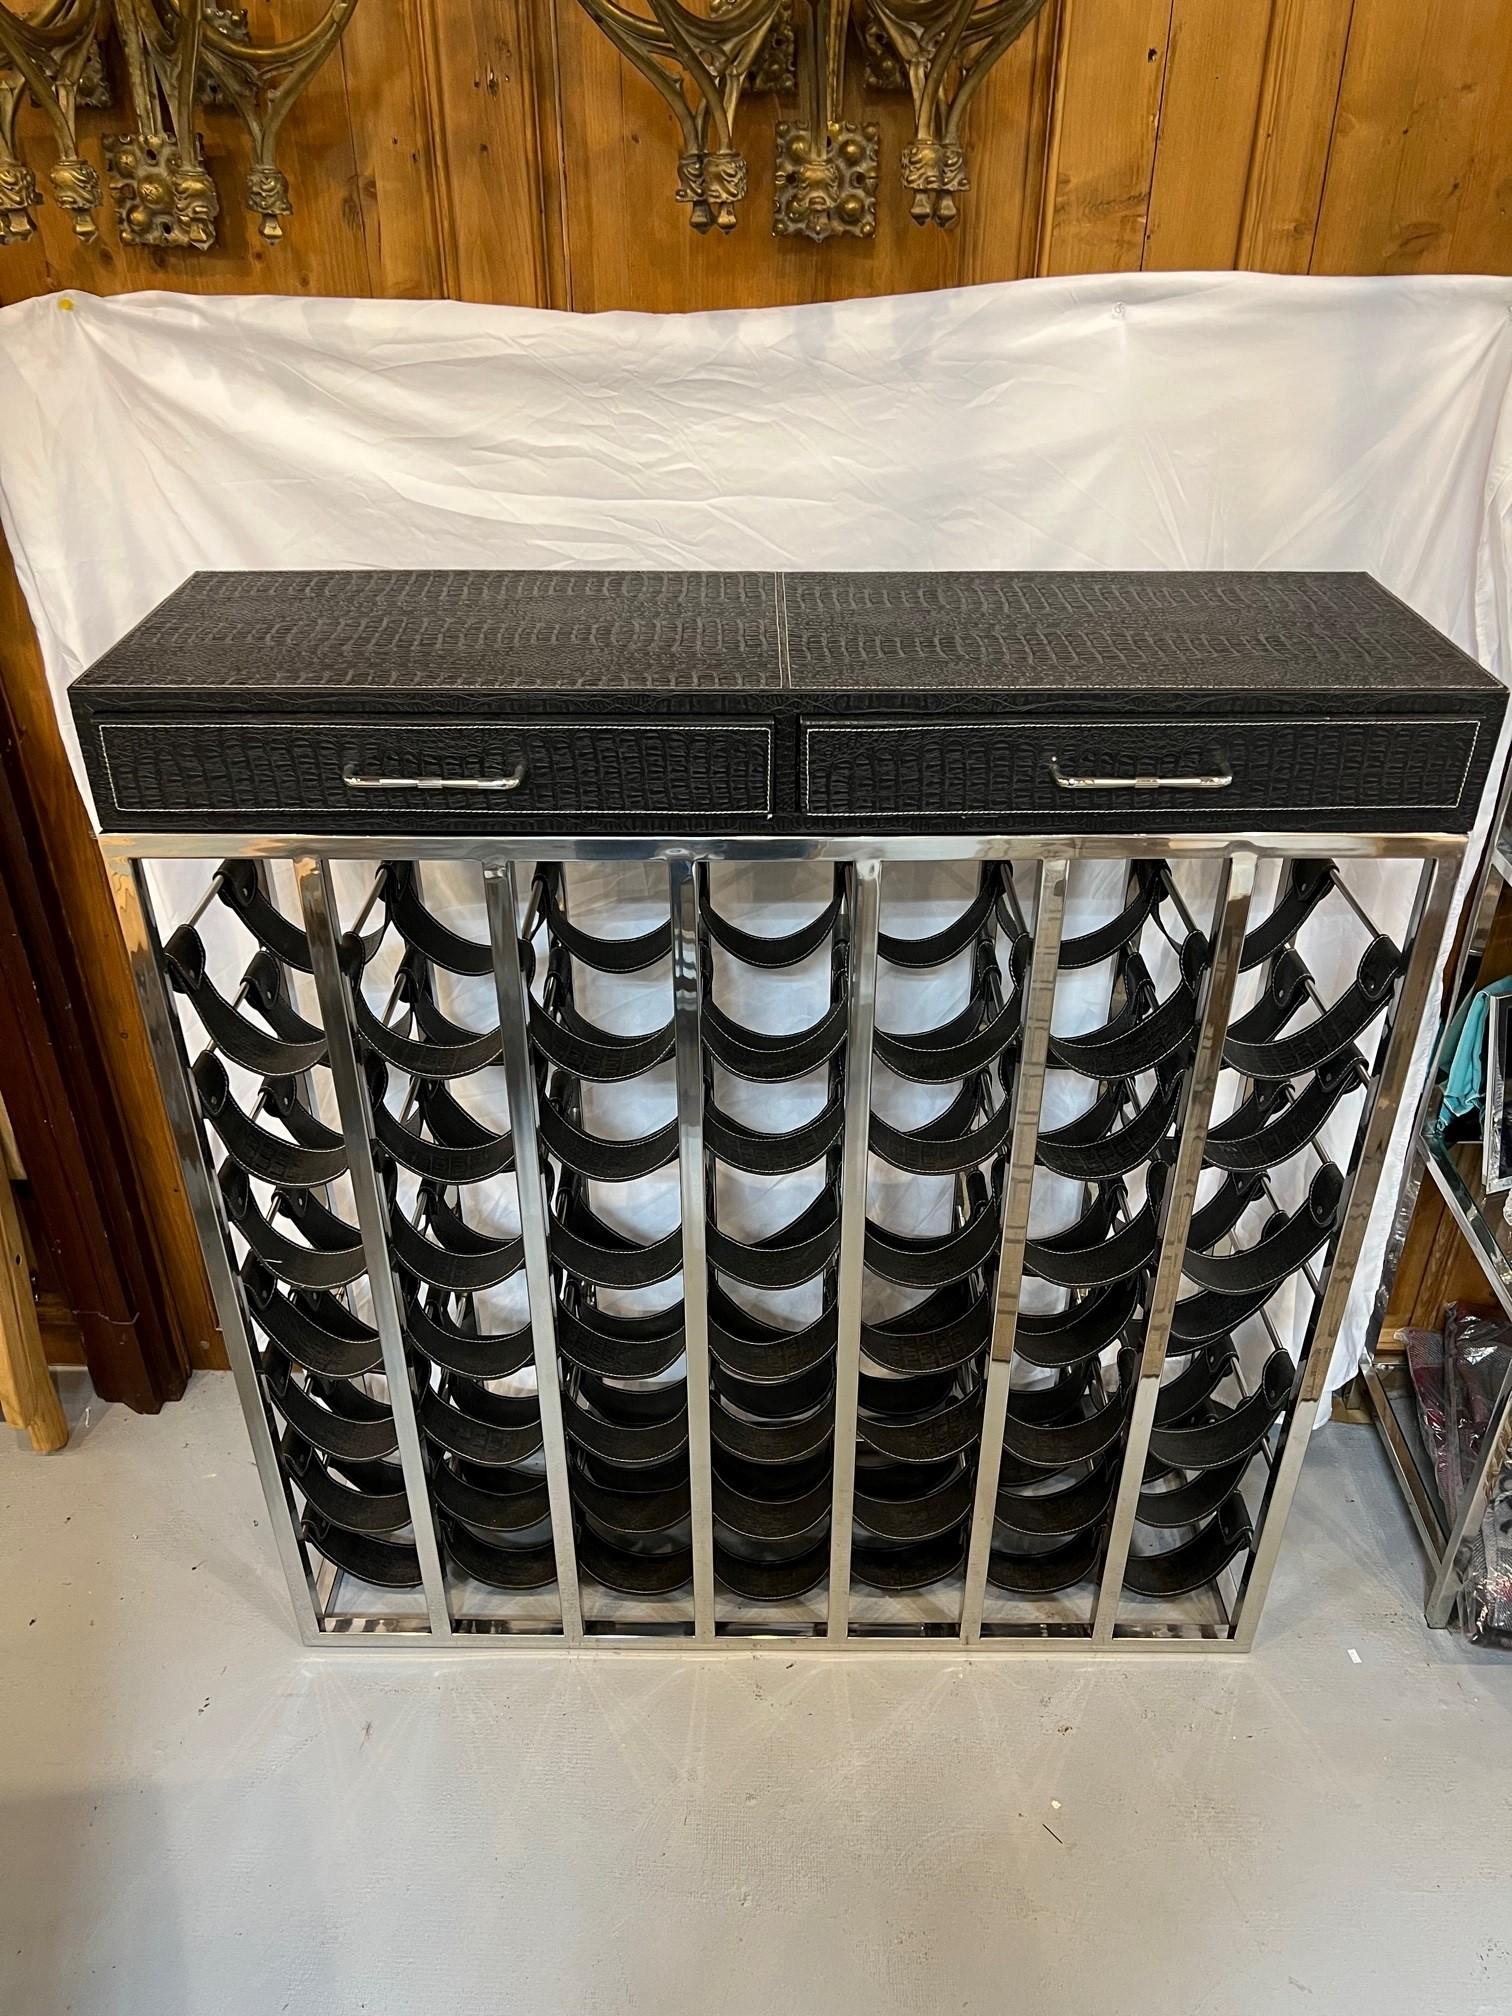 Plated Nickel Wine Rack Console with Leather Saddles for 49 Bottles and Two Drawers For Sale